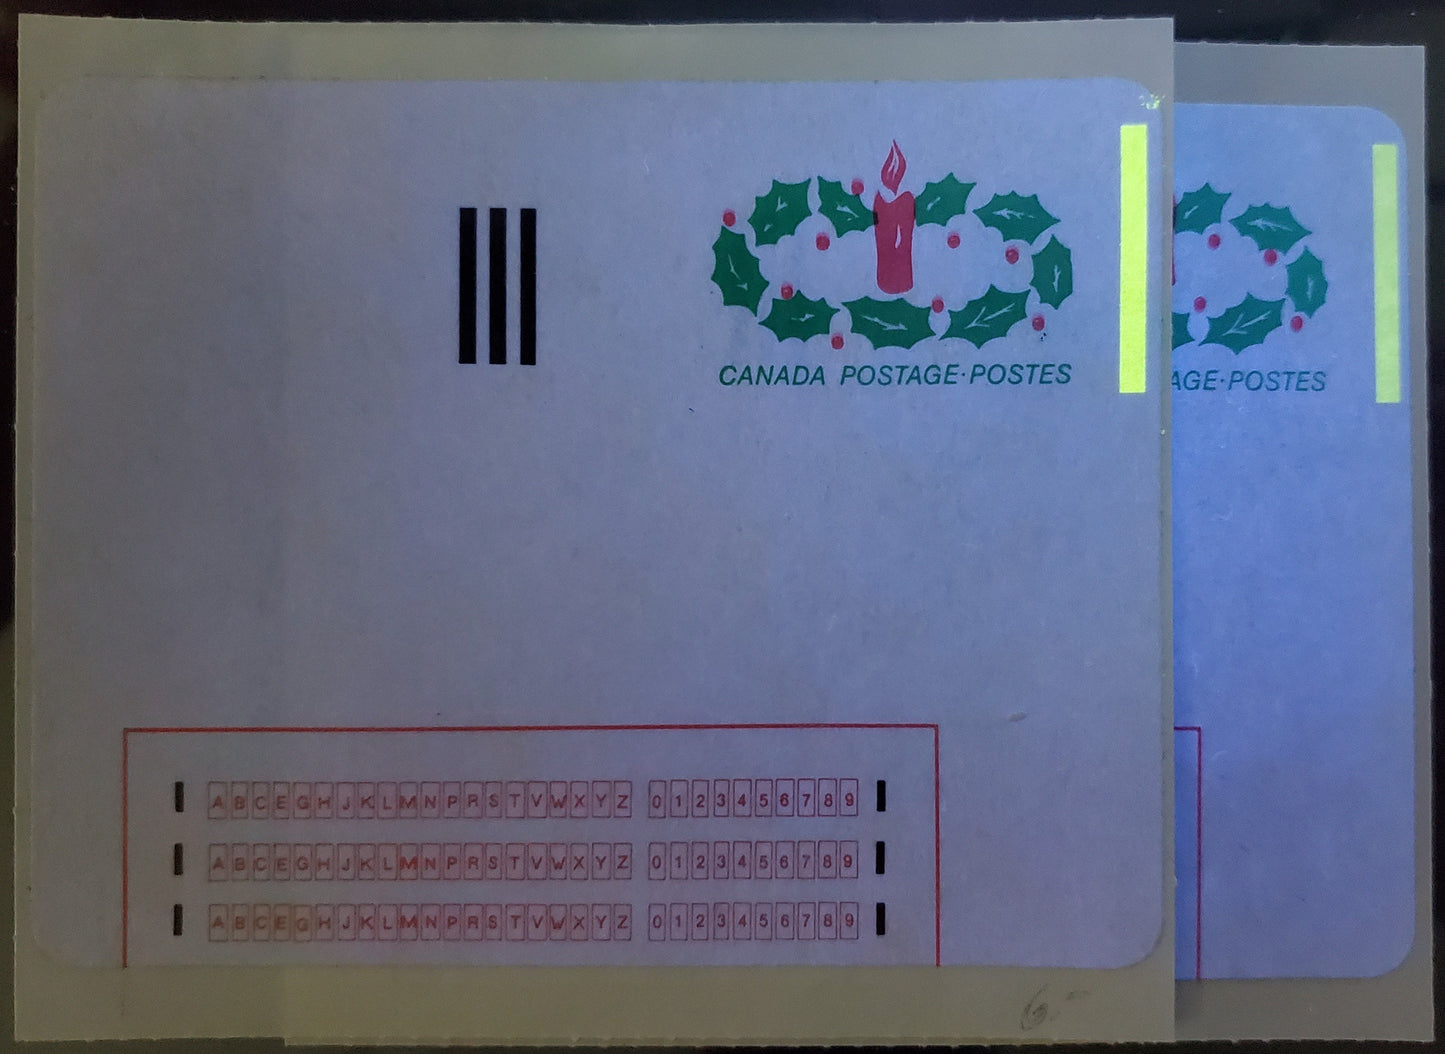 Lot 45 Canada #1ST, 2ST  Multicolored Candle & Holly, 1983-1984 Christmas Issue, 3 VFNH Stick N' Tic Labels With Strong & Weaker Tag Bars On The 1983 Label, Labels Are MF/HF & LF Papers